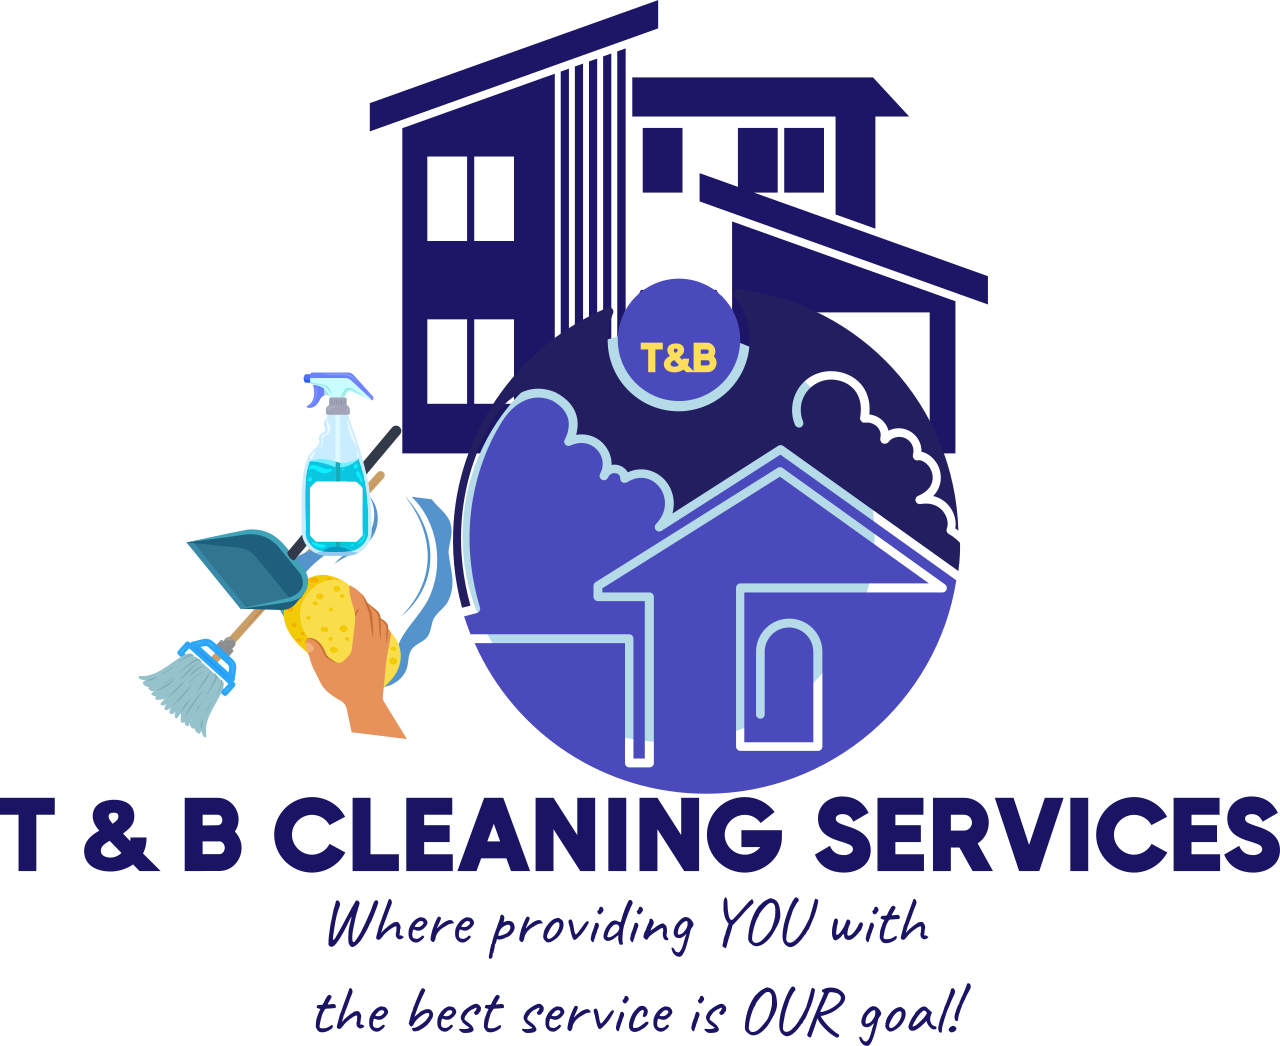 T & B Cleaning Services's logo